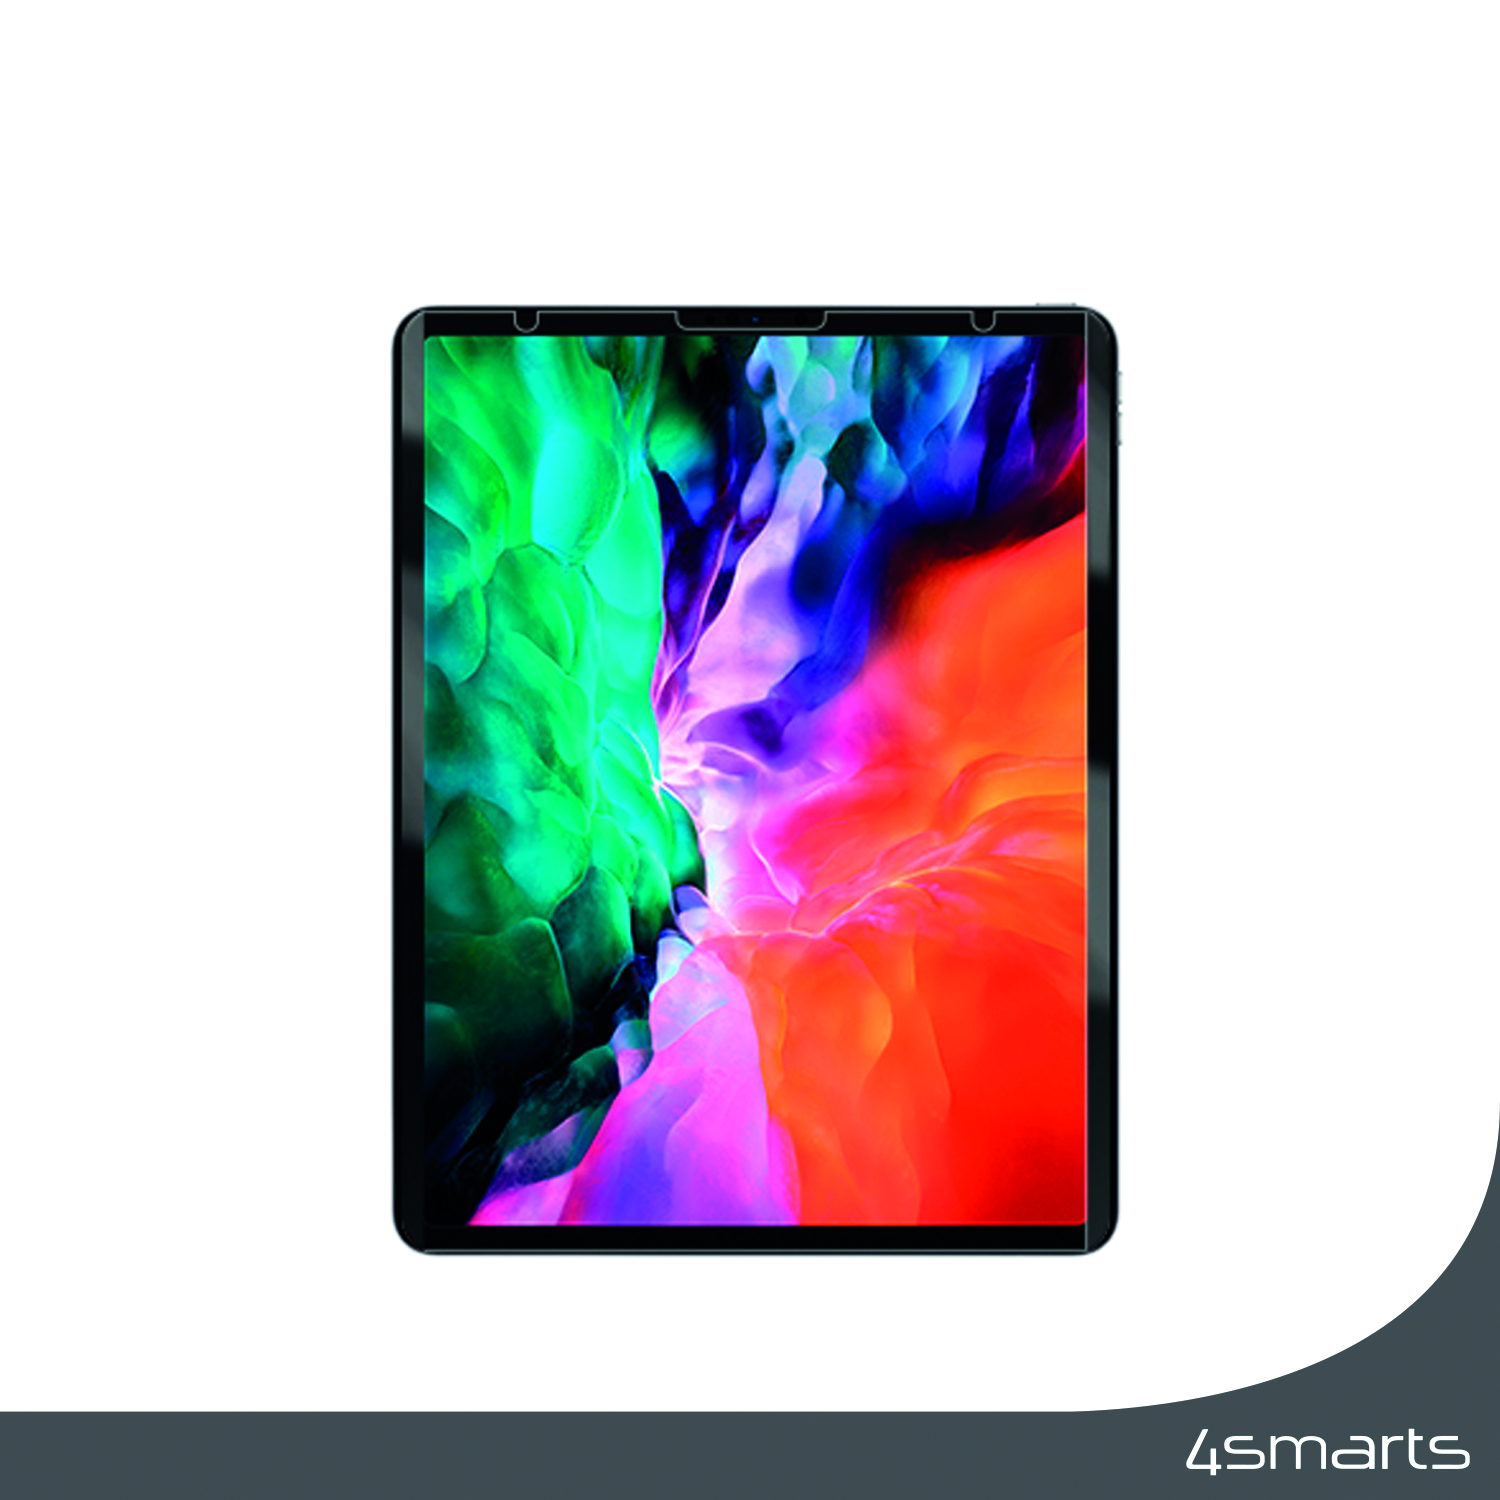 The 4smarts Smartprotect Magnetic Privacy Filter for Apple iPad Pro 11 (1st Gen./2nd Gen./3rd Gen./4th Gen.) offers an individual, secure shielding without compromising the image quality on the front side.